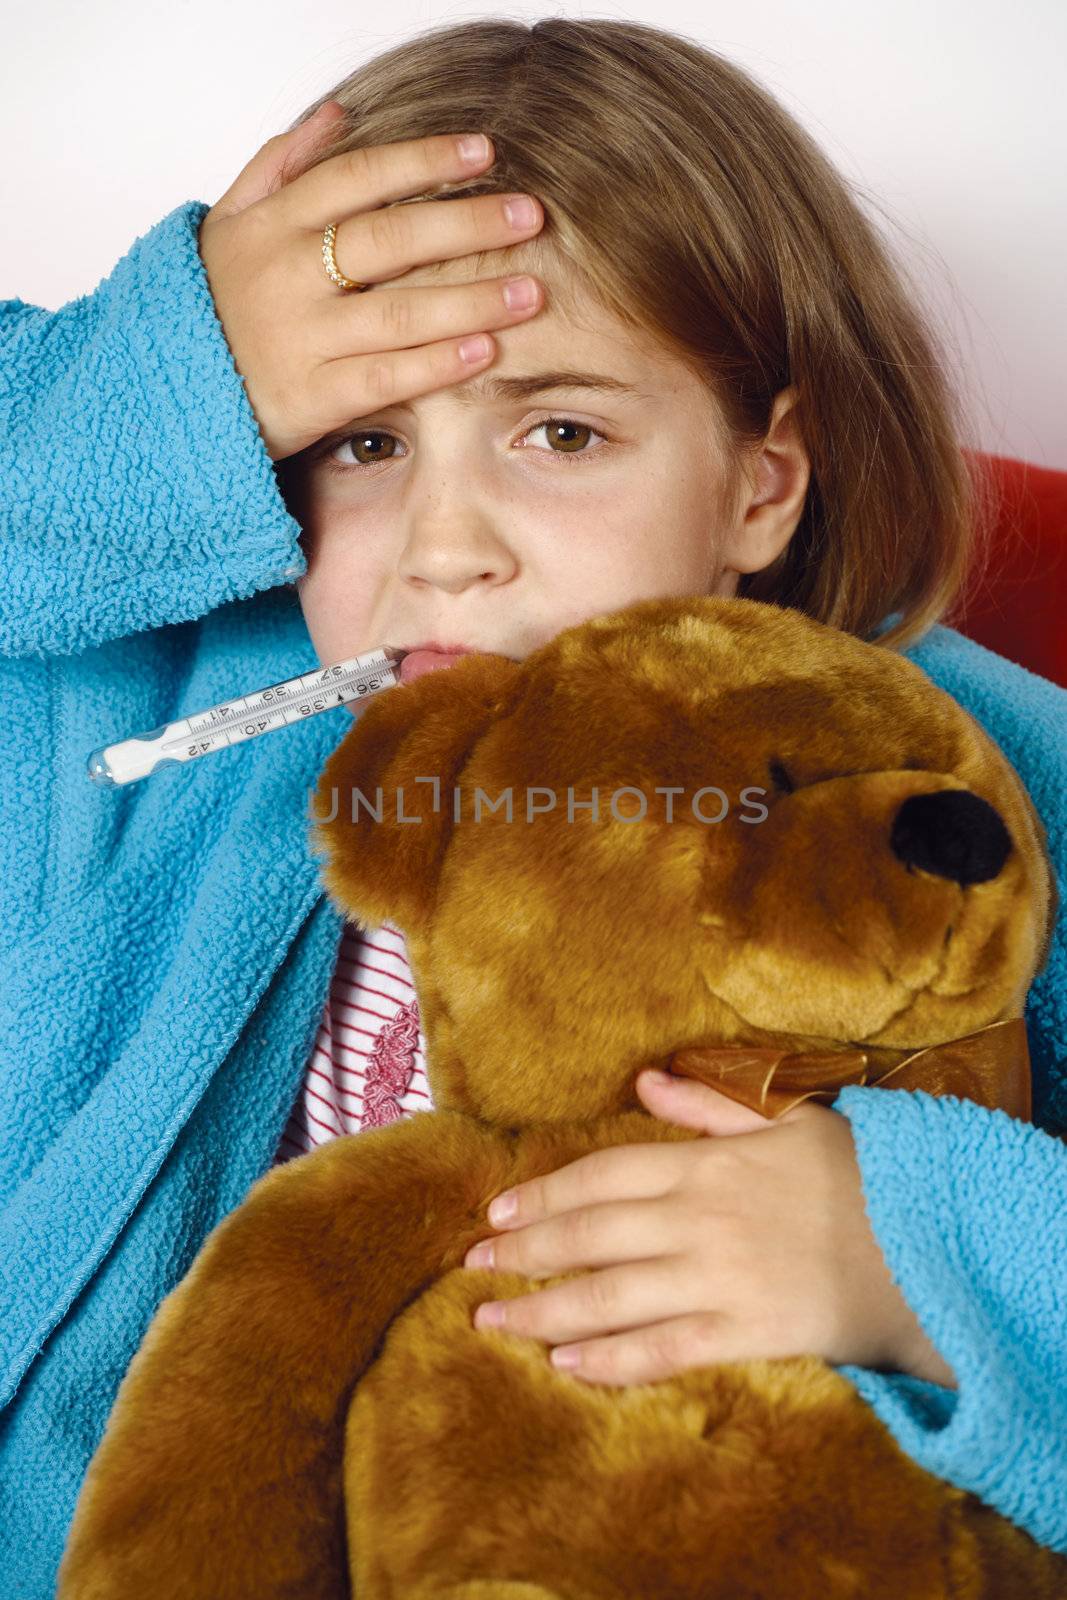 Sick child with thermometer in her mouth, a hand on her forehead and clutching a stuffed animal.